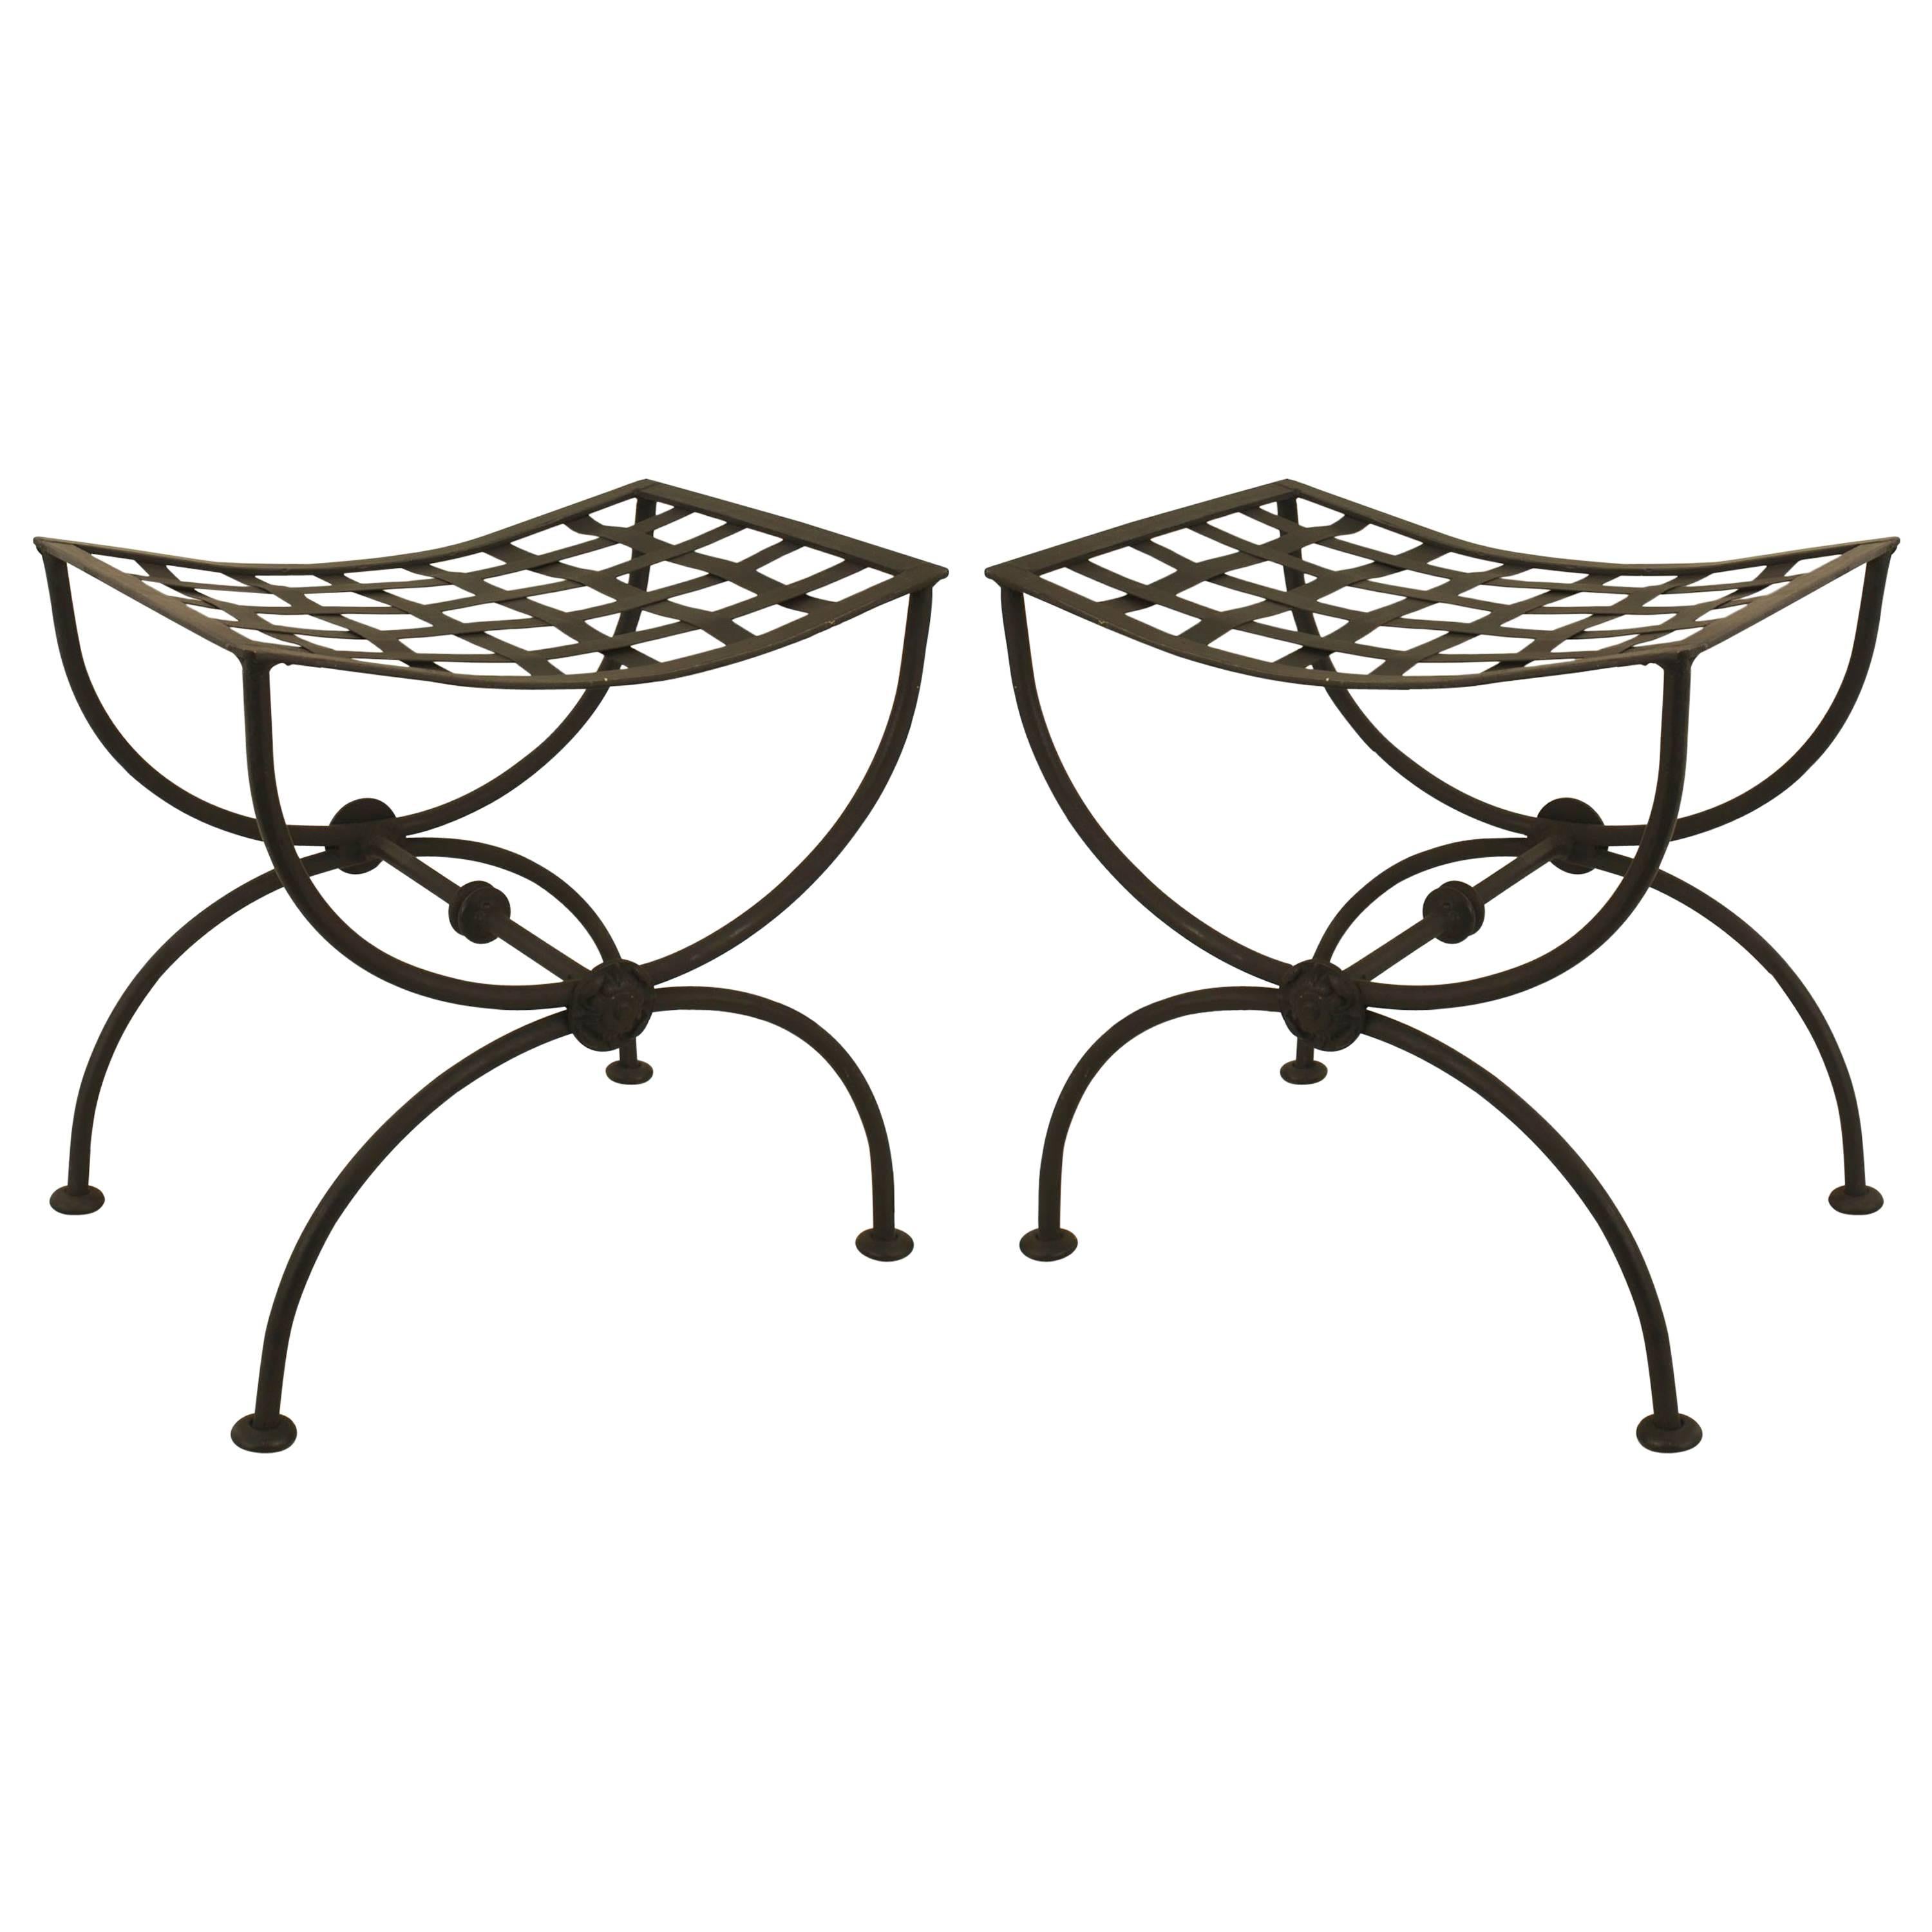 Pair of Italian Renaissance Wrought Iron Benches For Sale